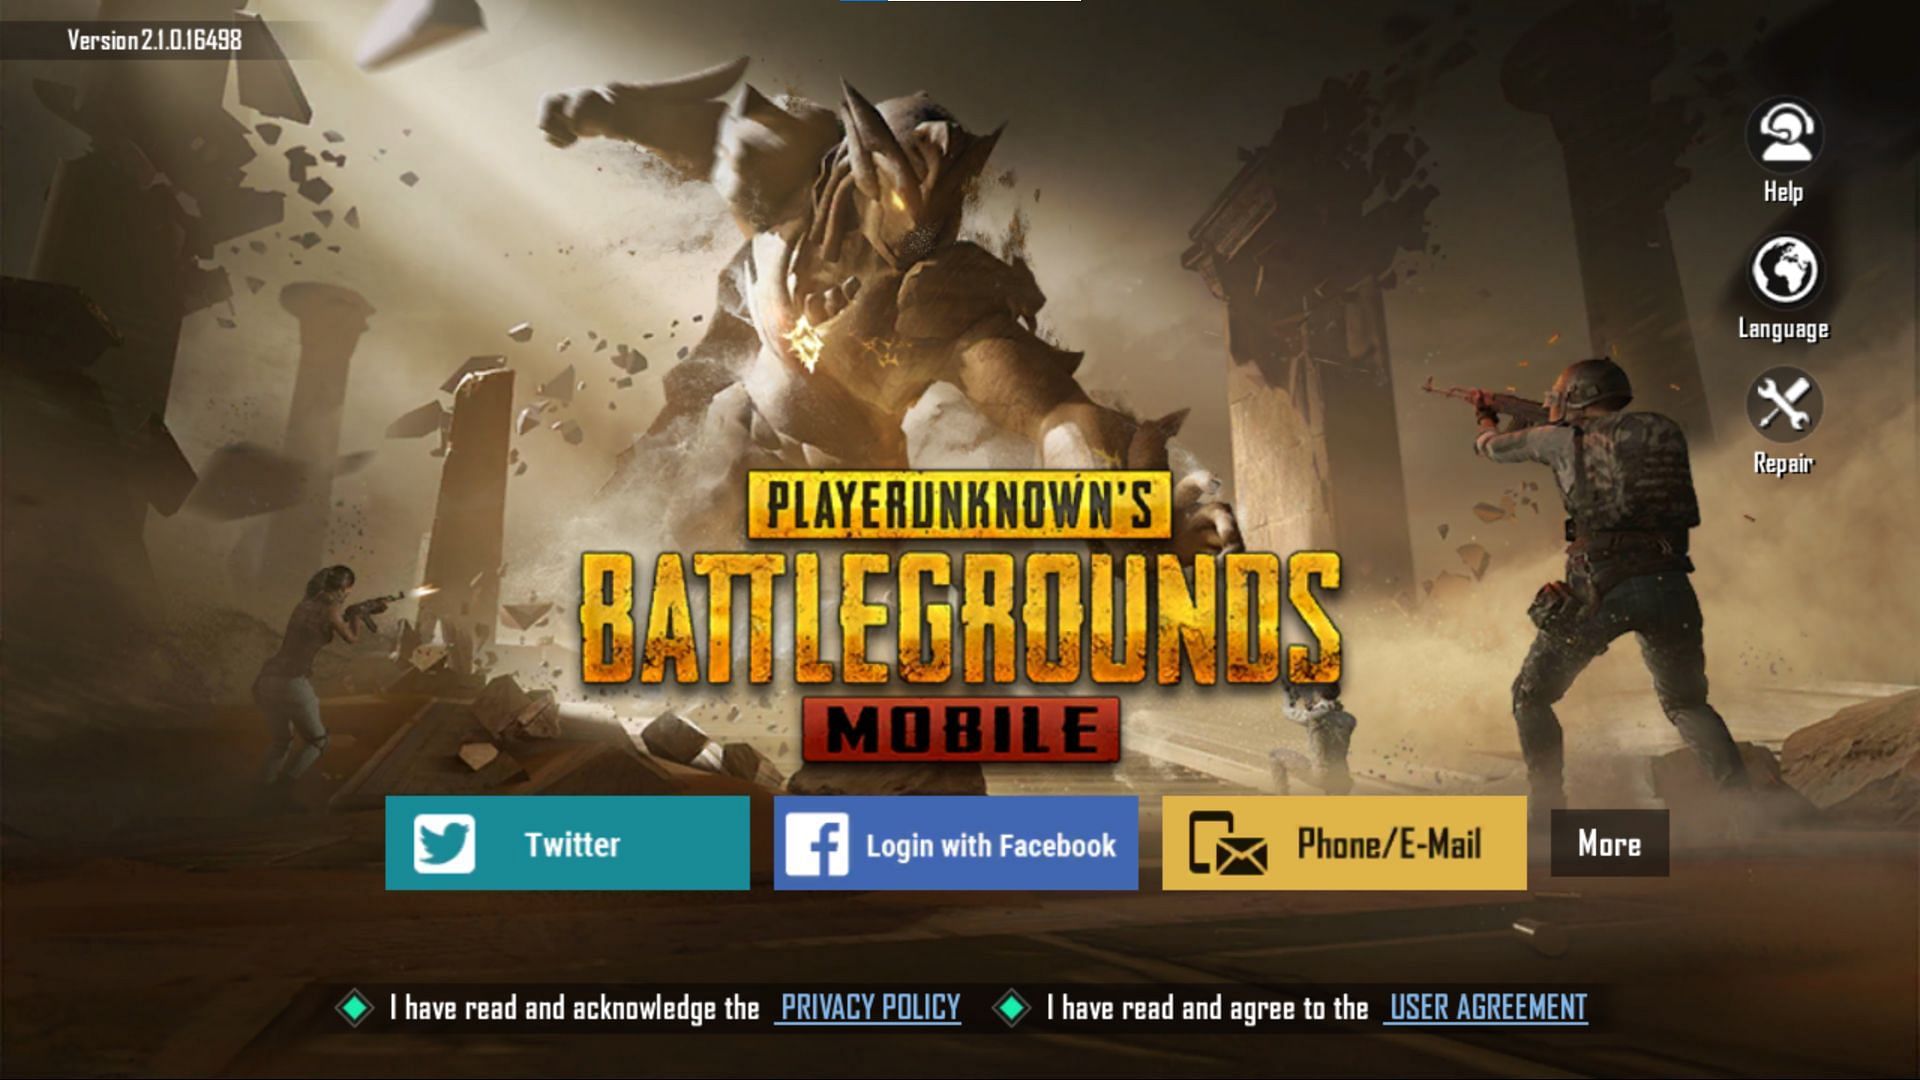 Download failed because you may not have purchased this app pubg mobile что делать фото 51